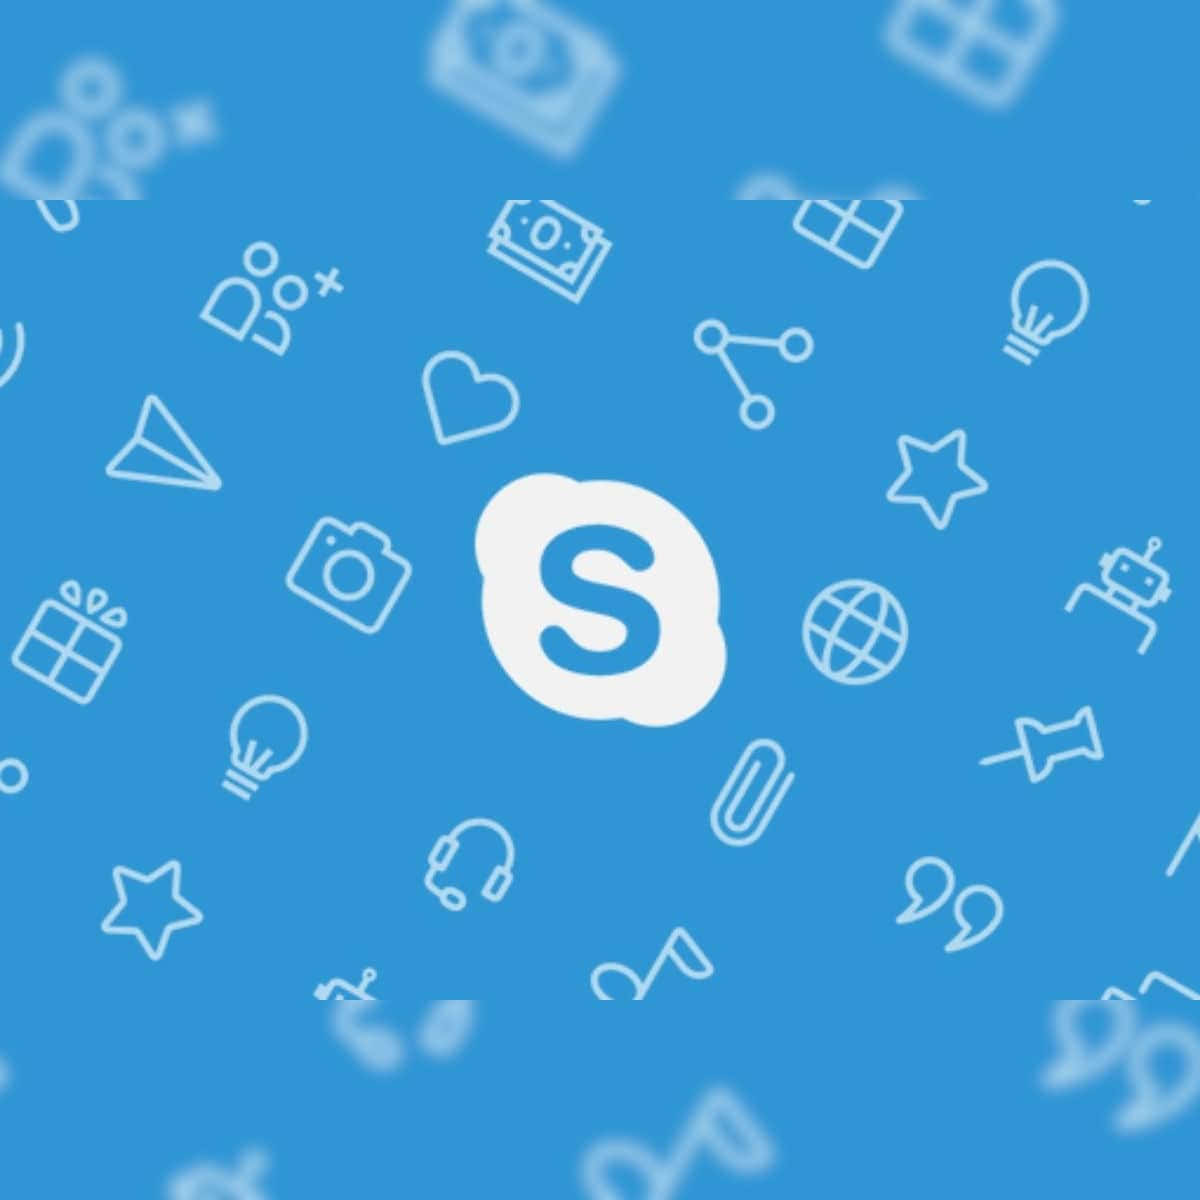 Get connected with friends and family via Skype